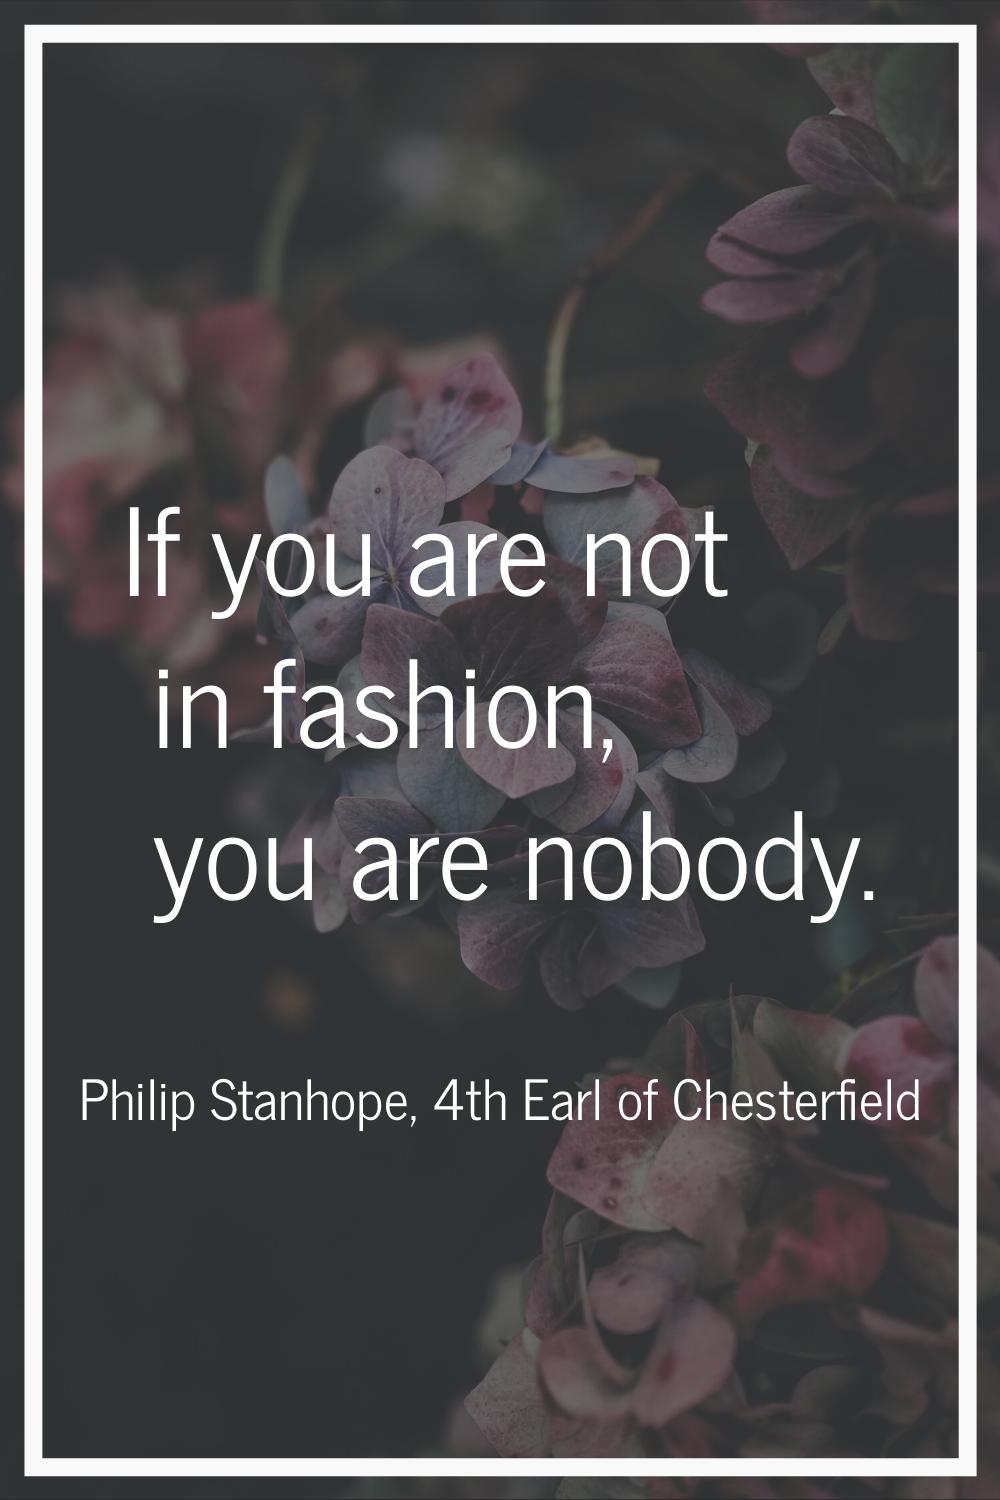 If you are not in fashion, you are nobody.